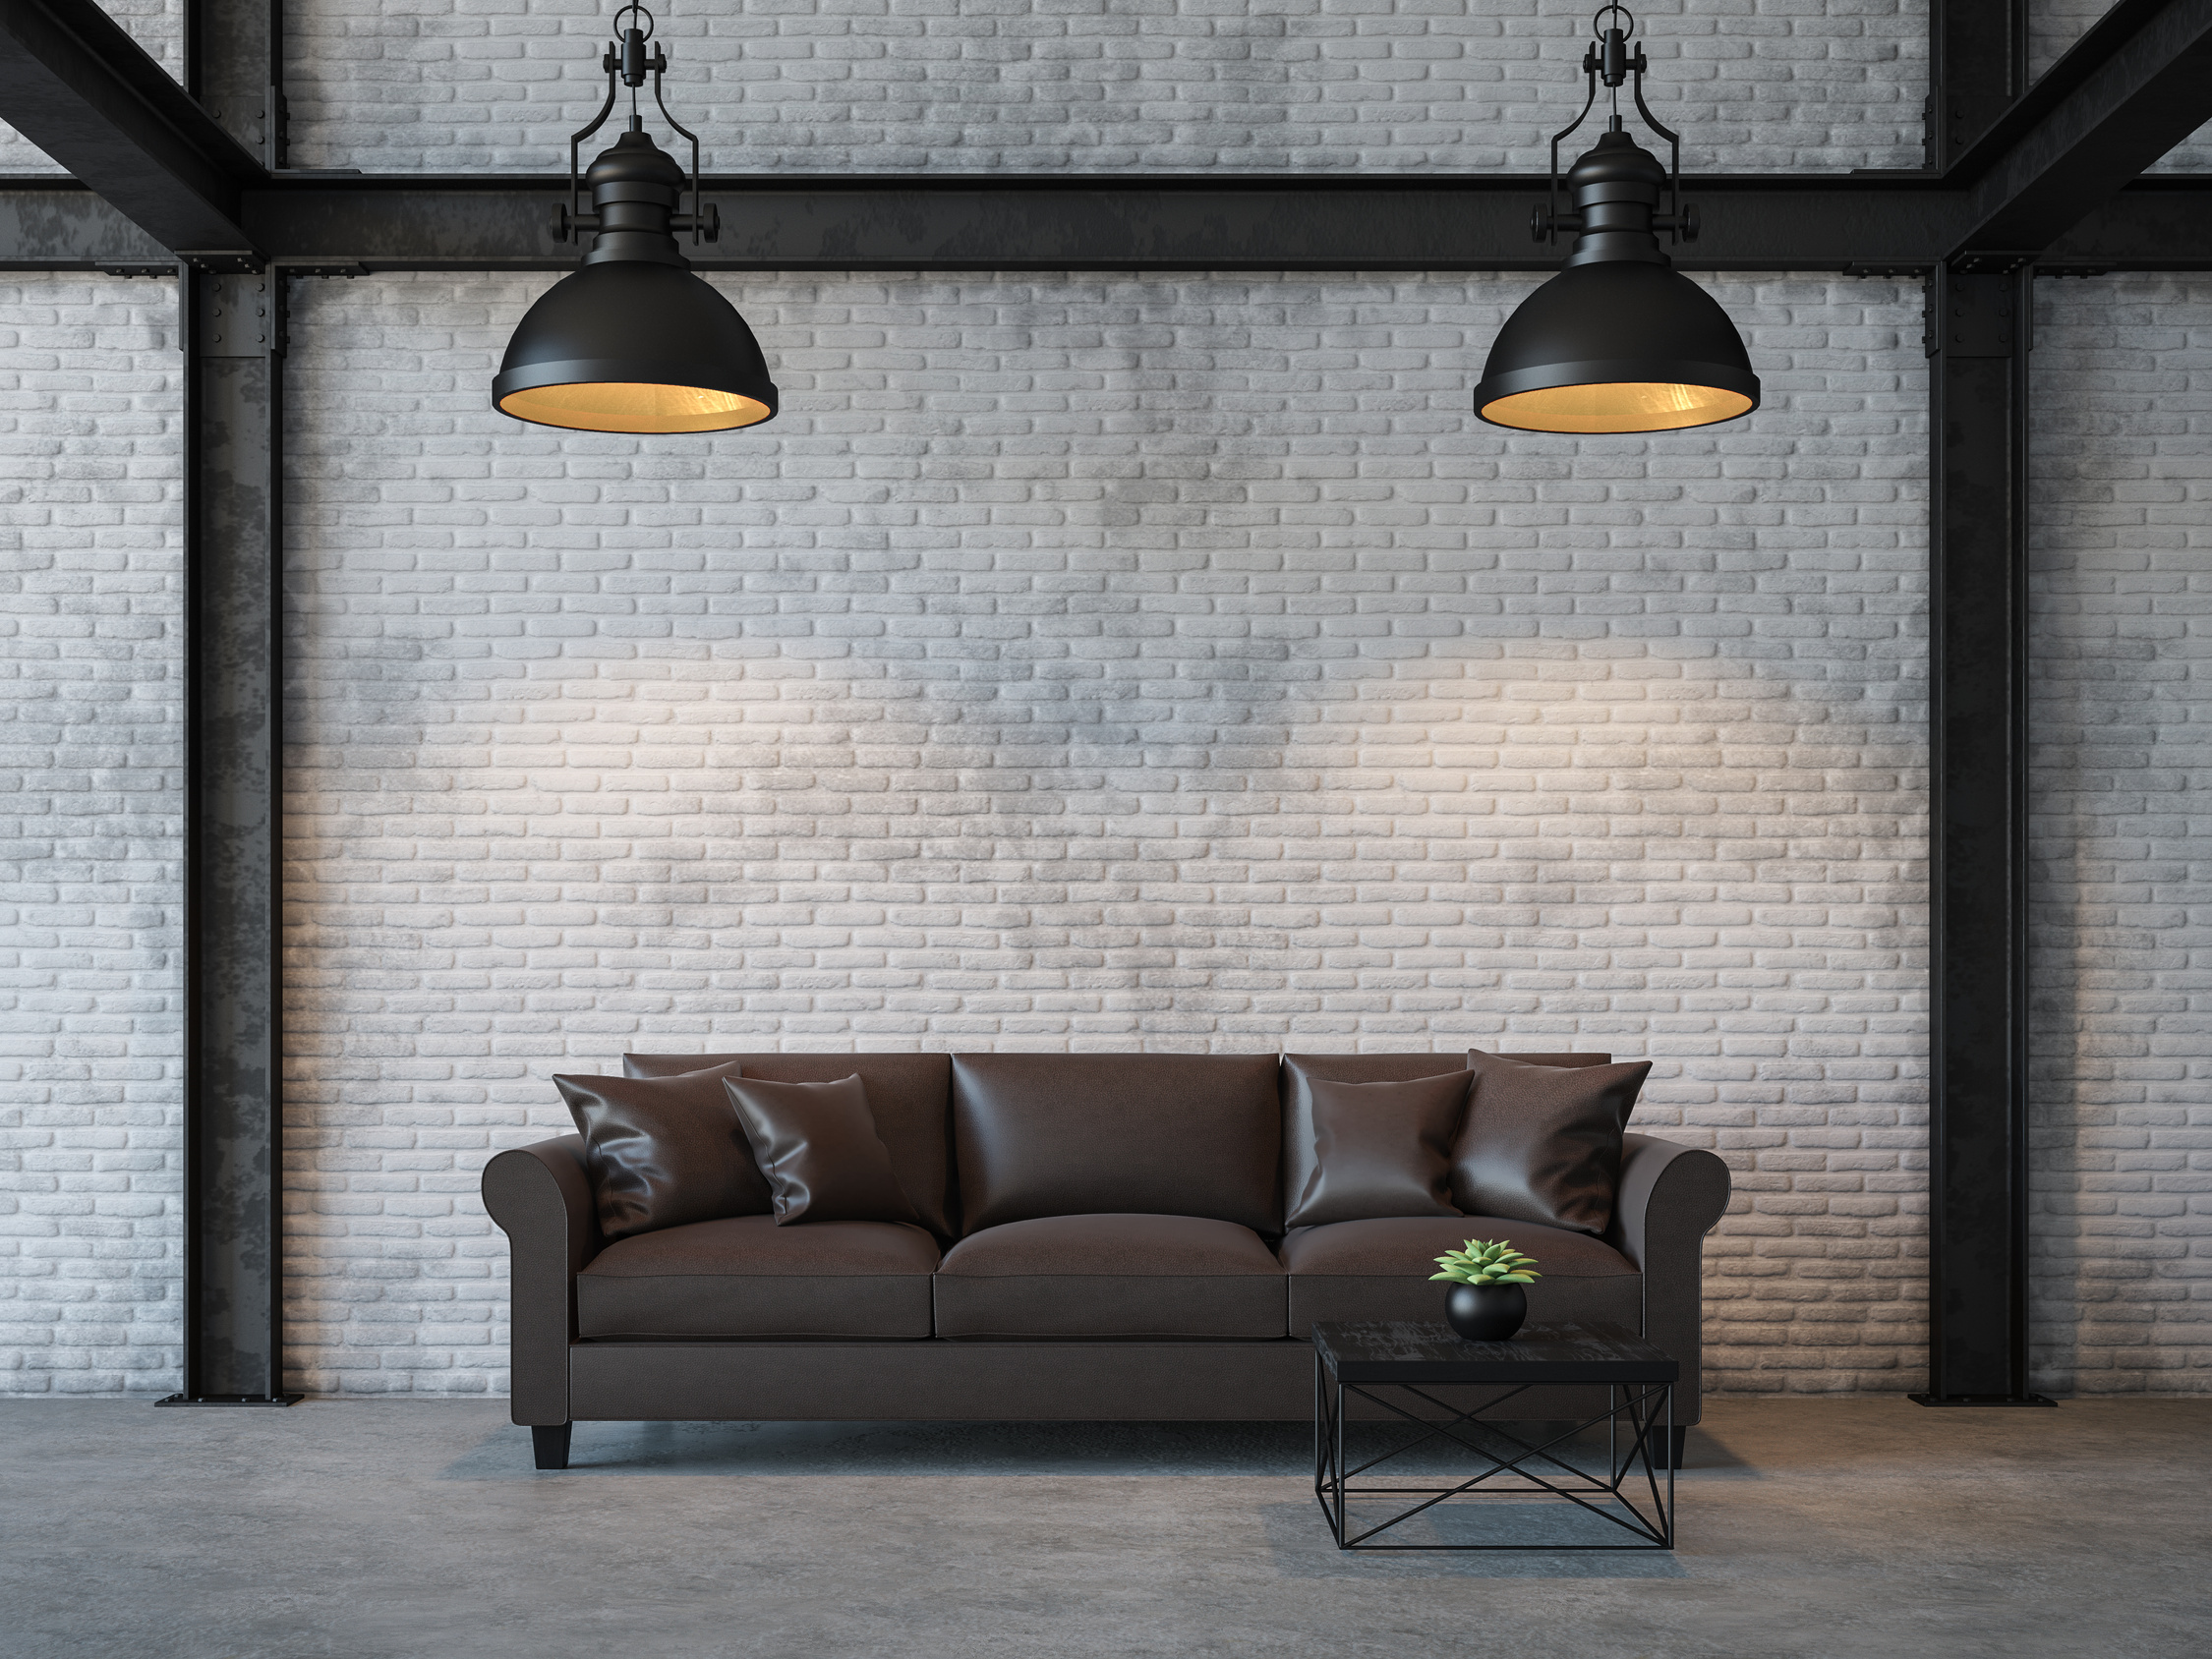 Loft style living room with white brick wall 3d render